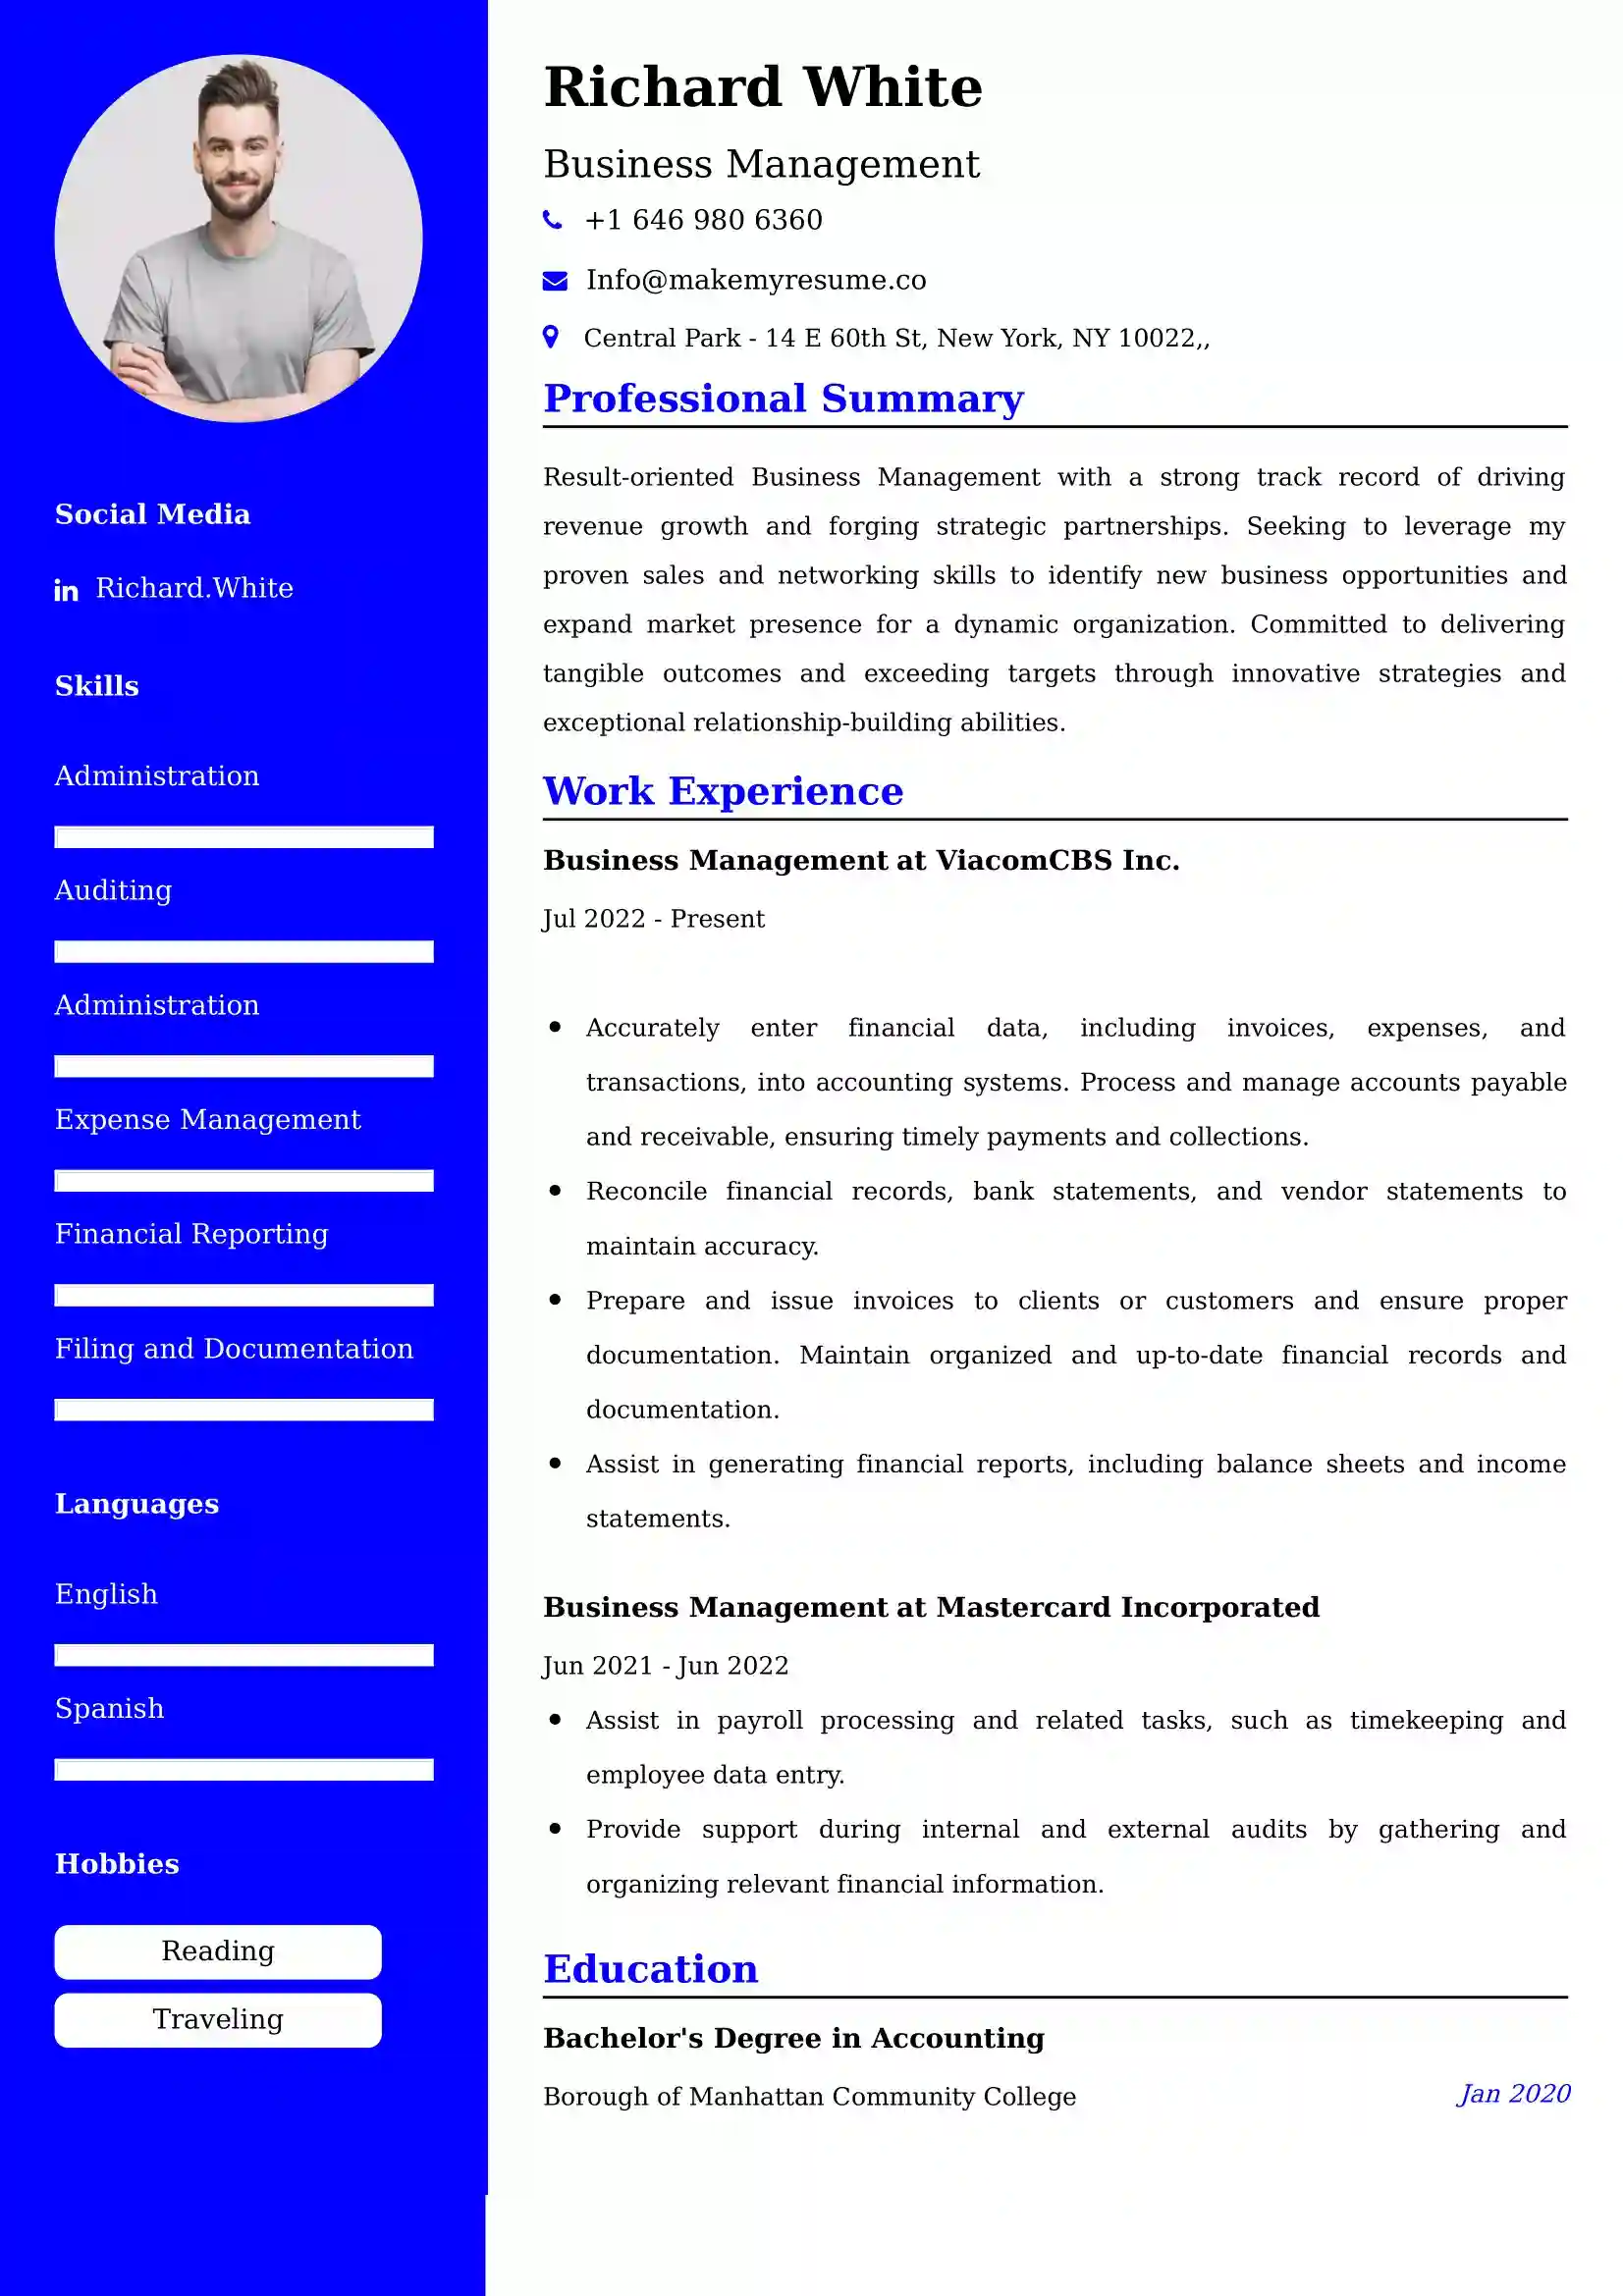 Business Management Resume Examples for UAE